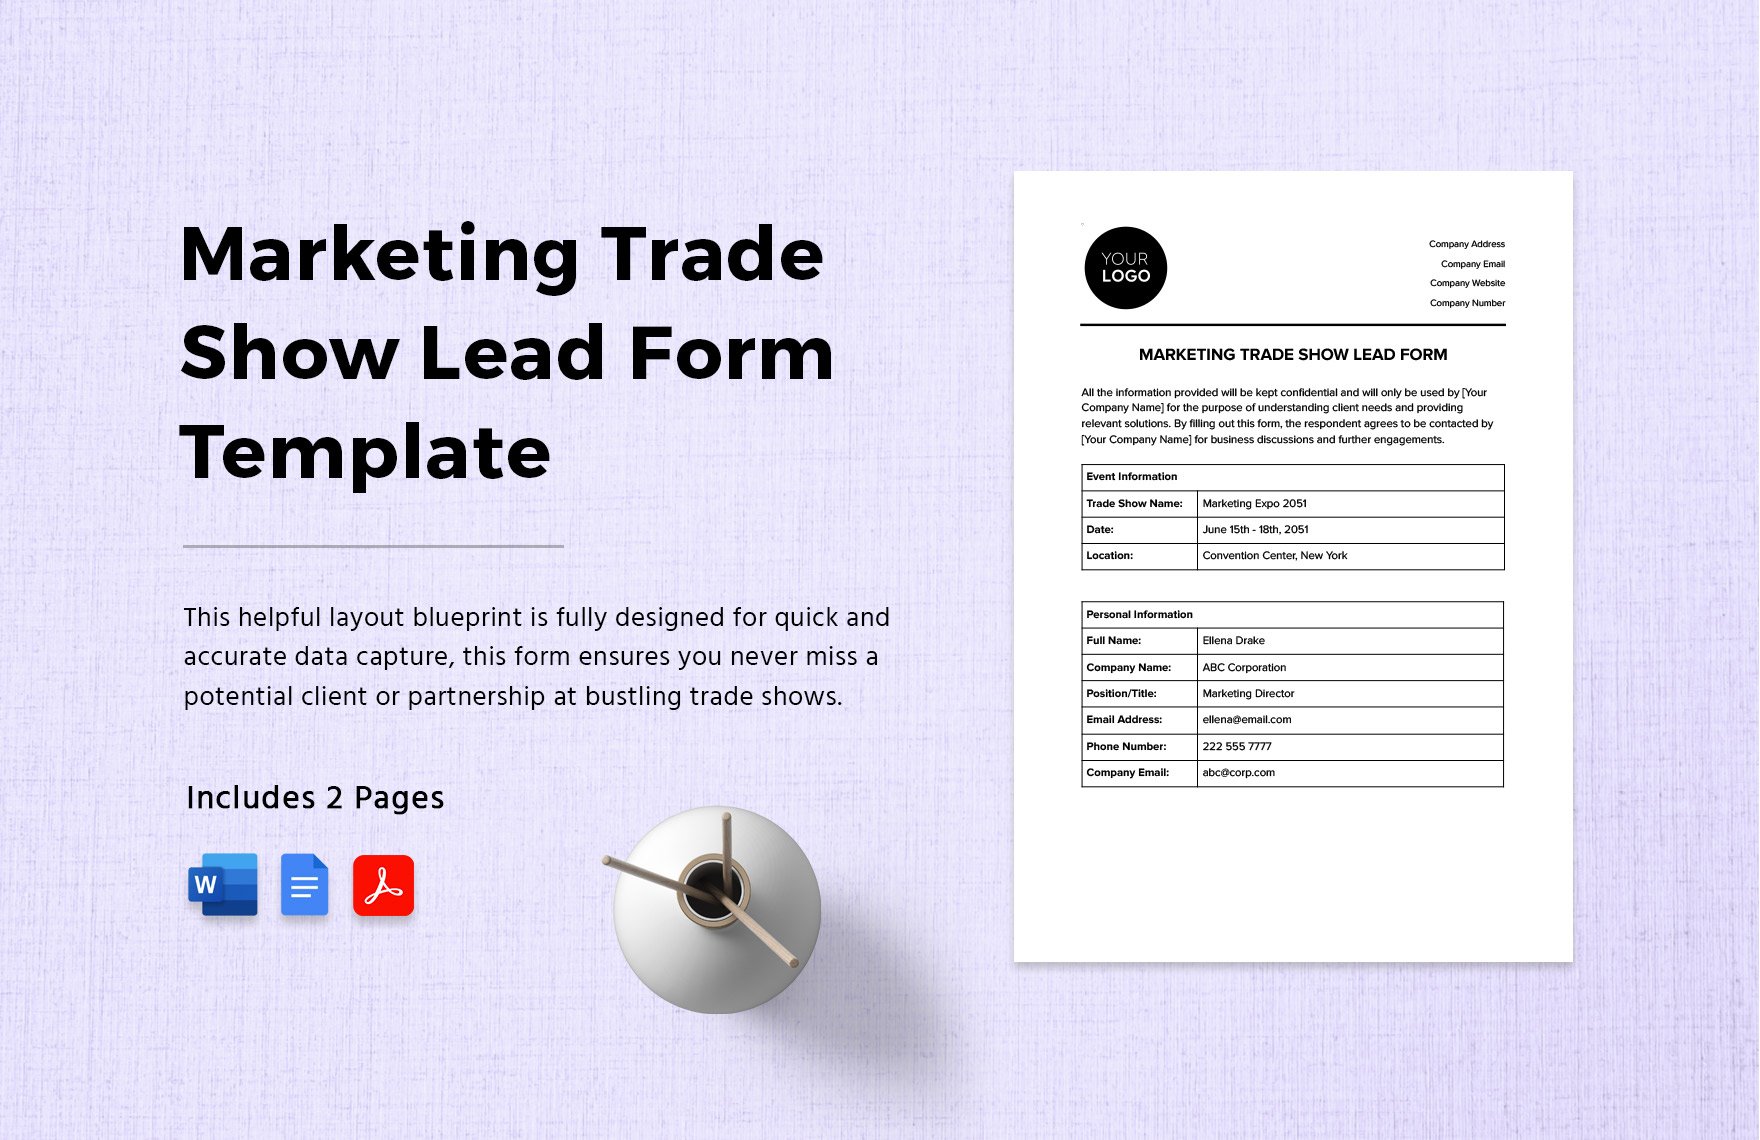 Marketing Trade Show Lead Form Template